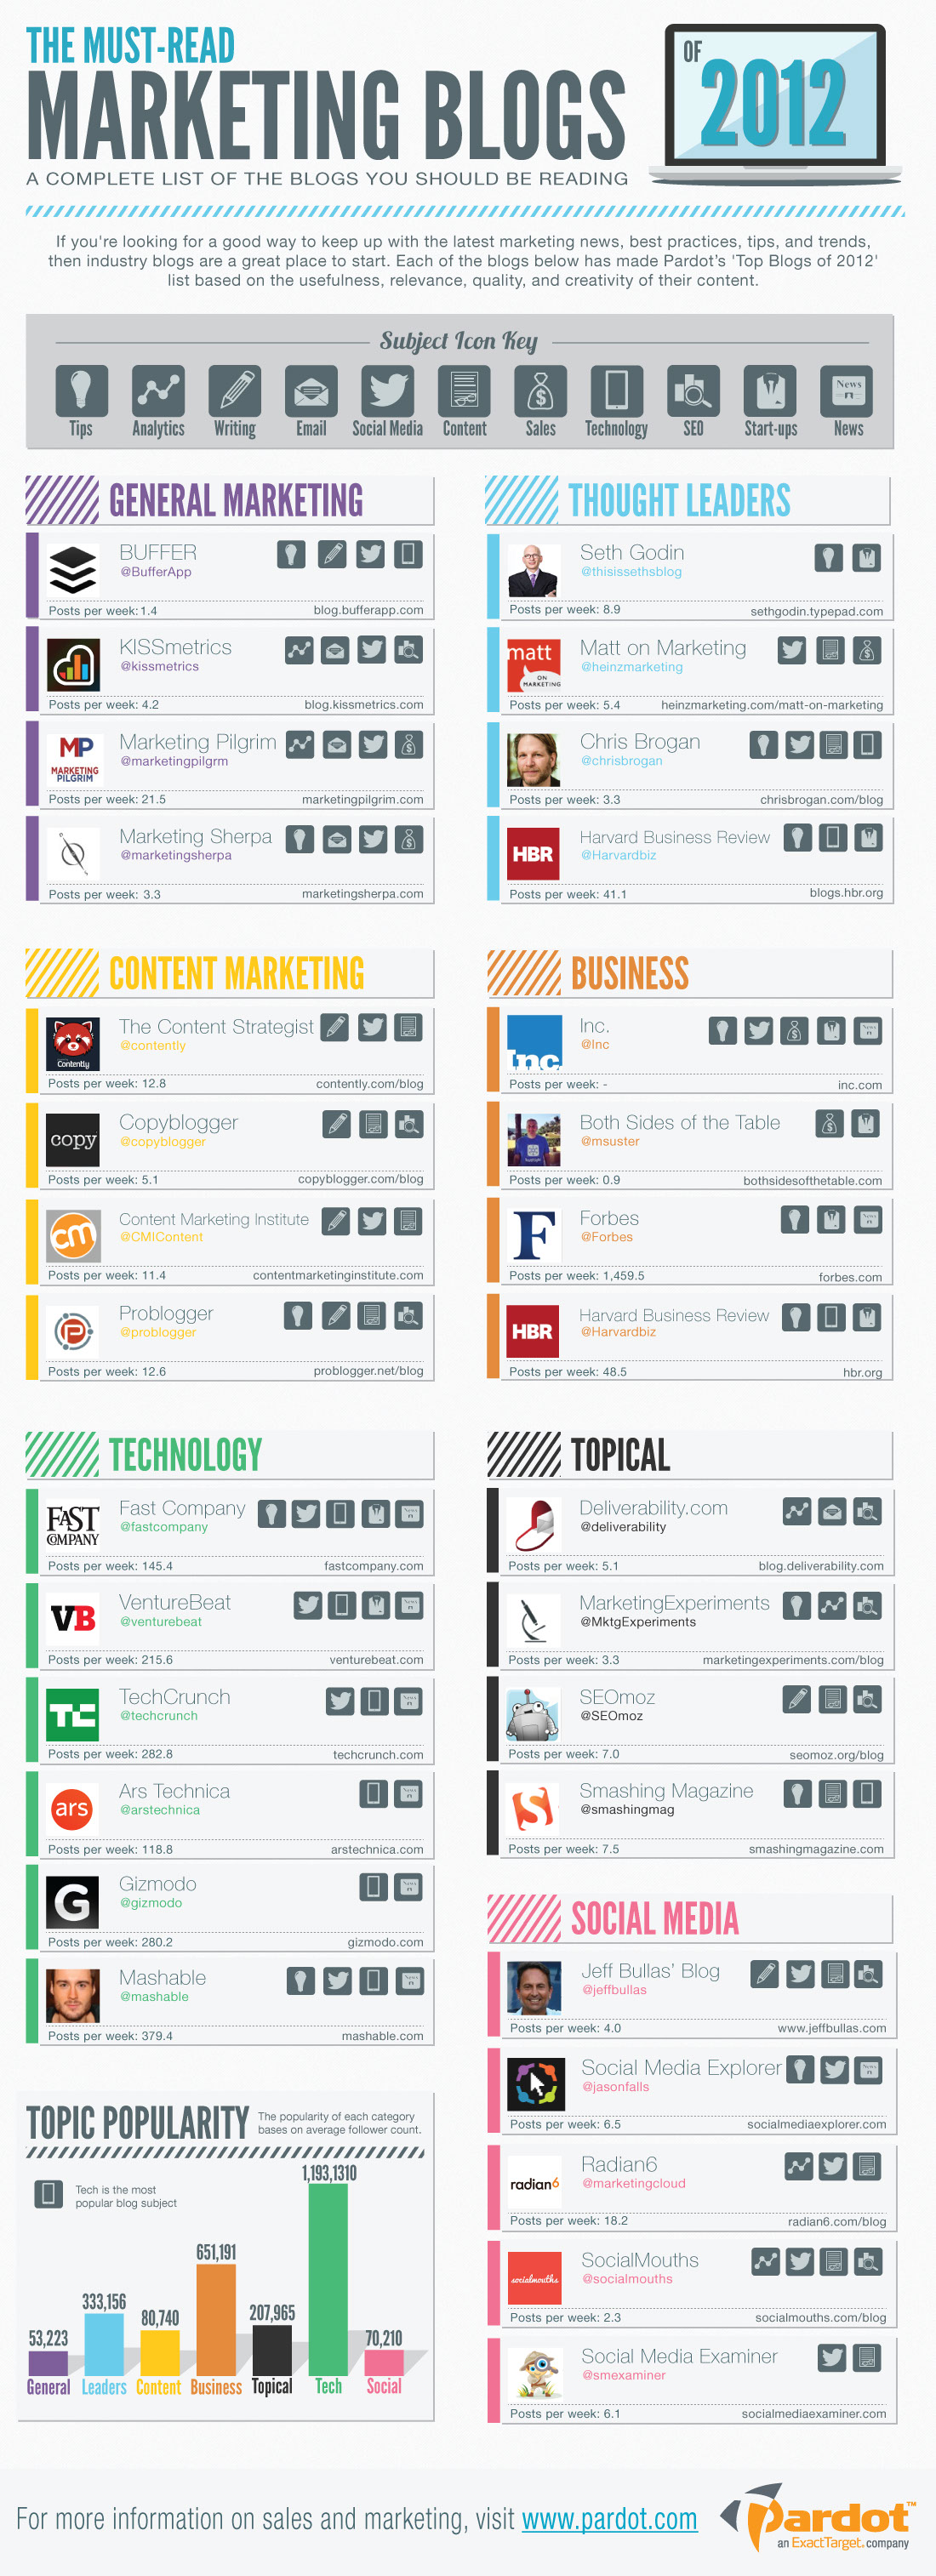 Top Marketing Blogs 2012-Infographic